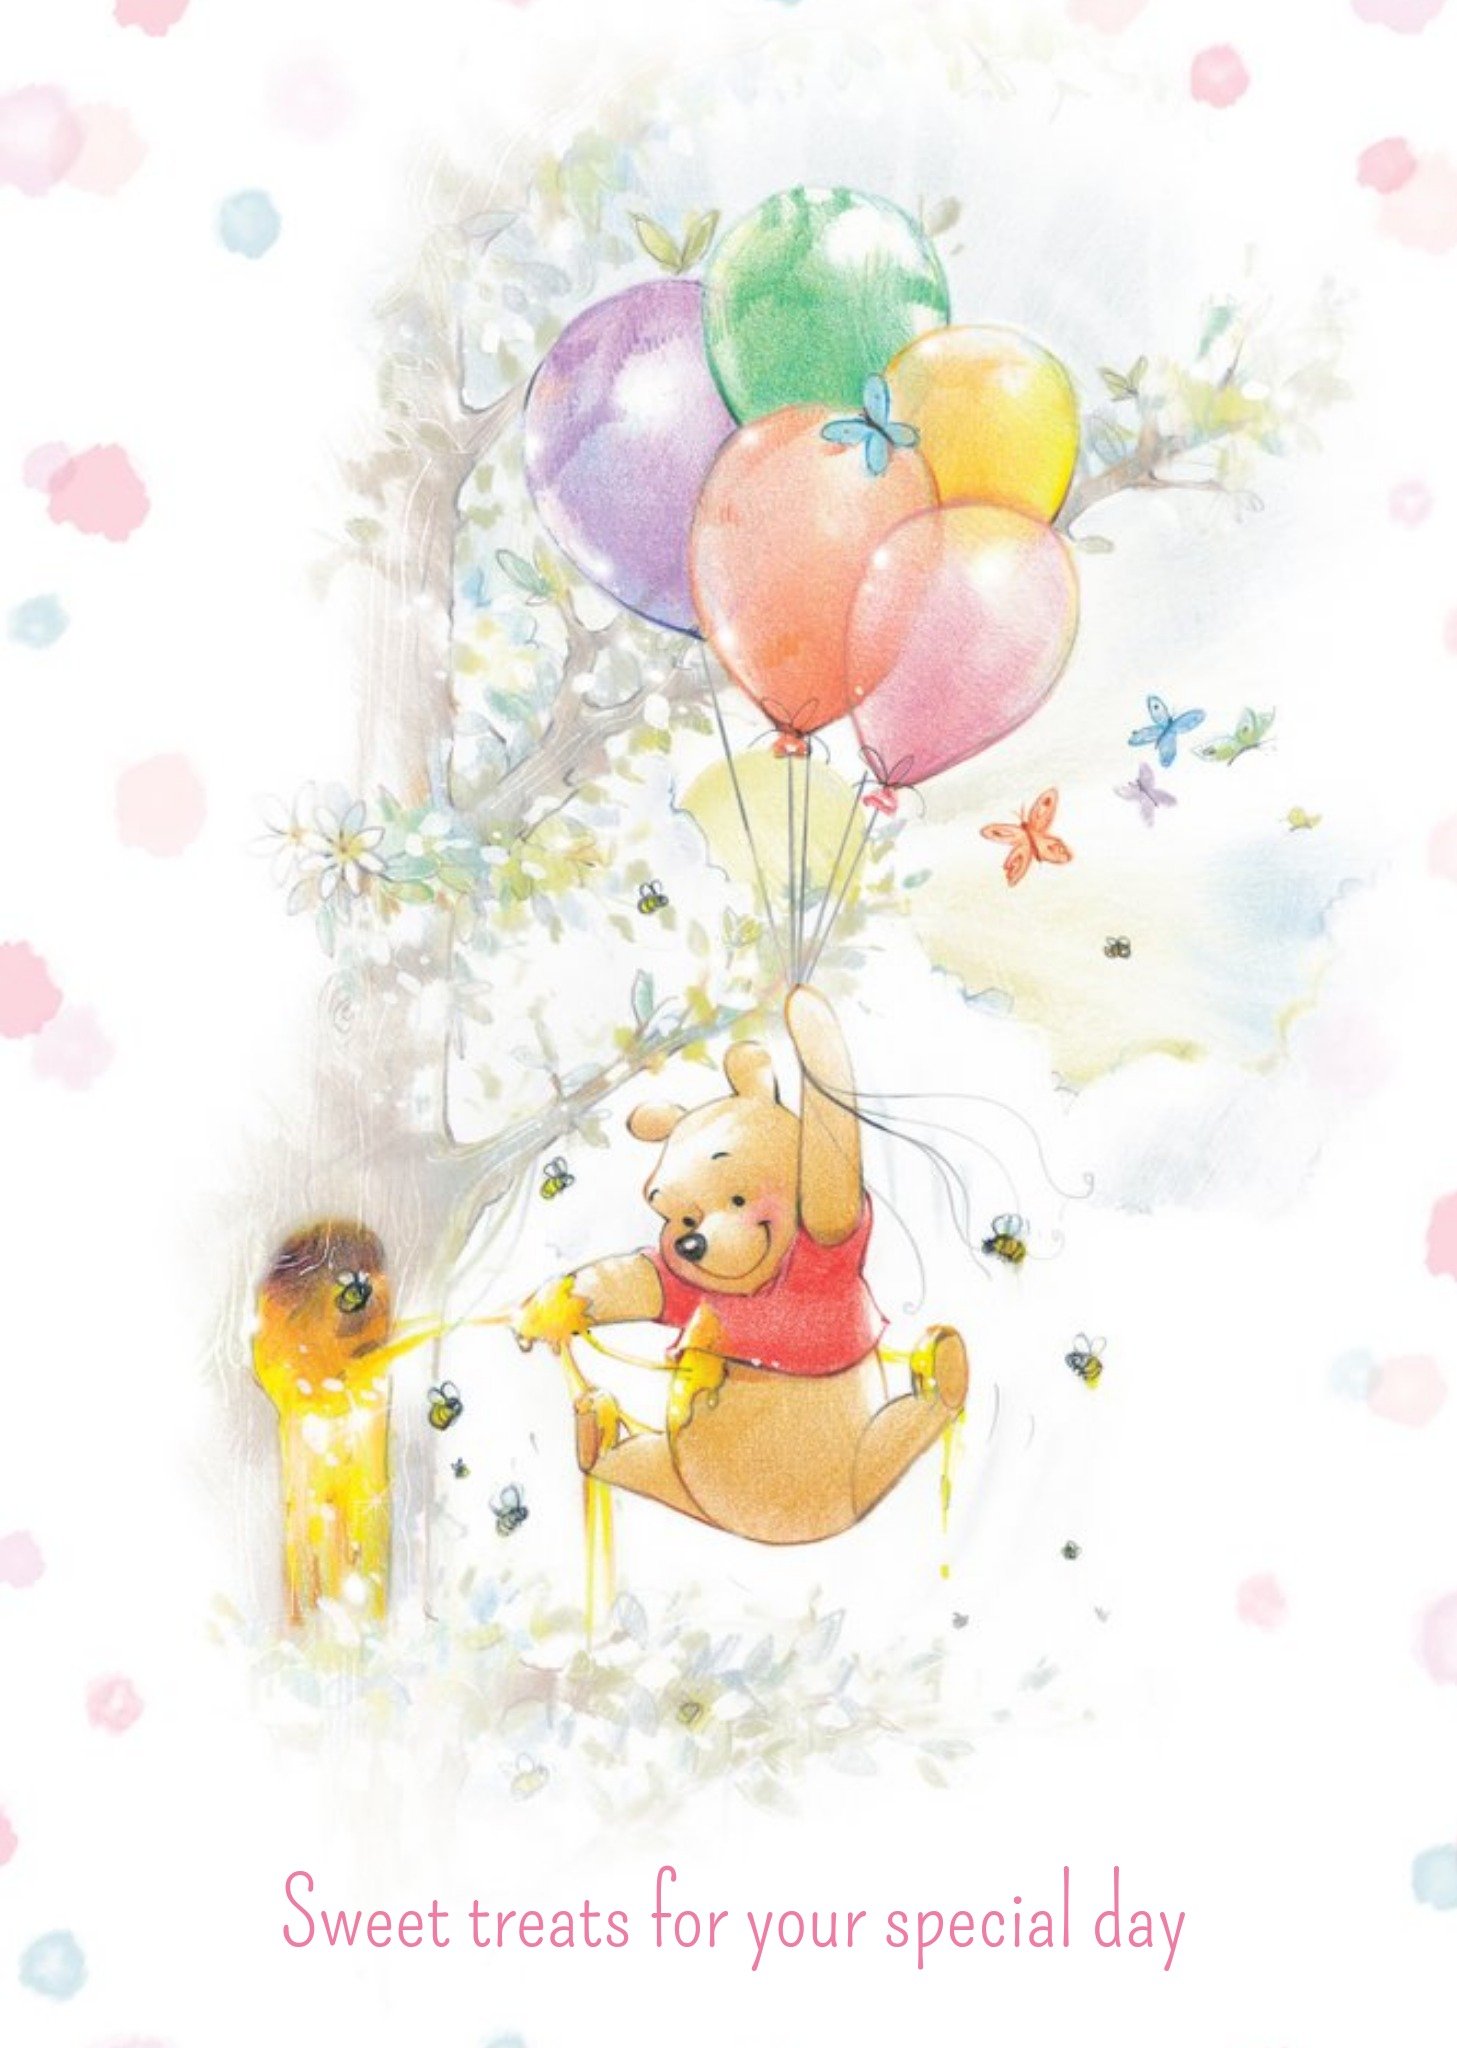 Disney Winnie The Pooh Balloons And Honey Personalised Happy Birthday Card, Large